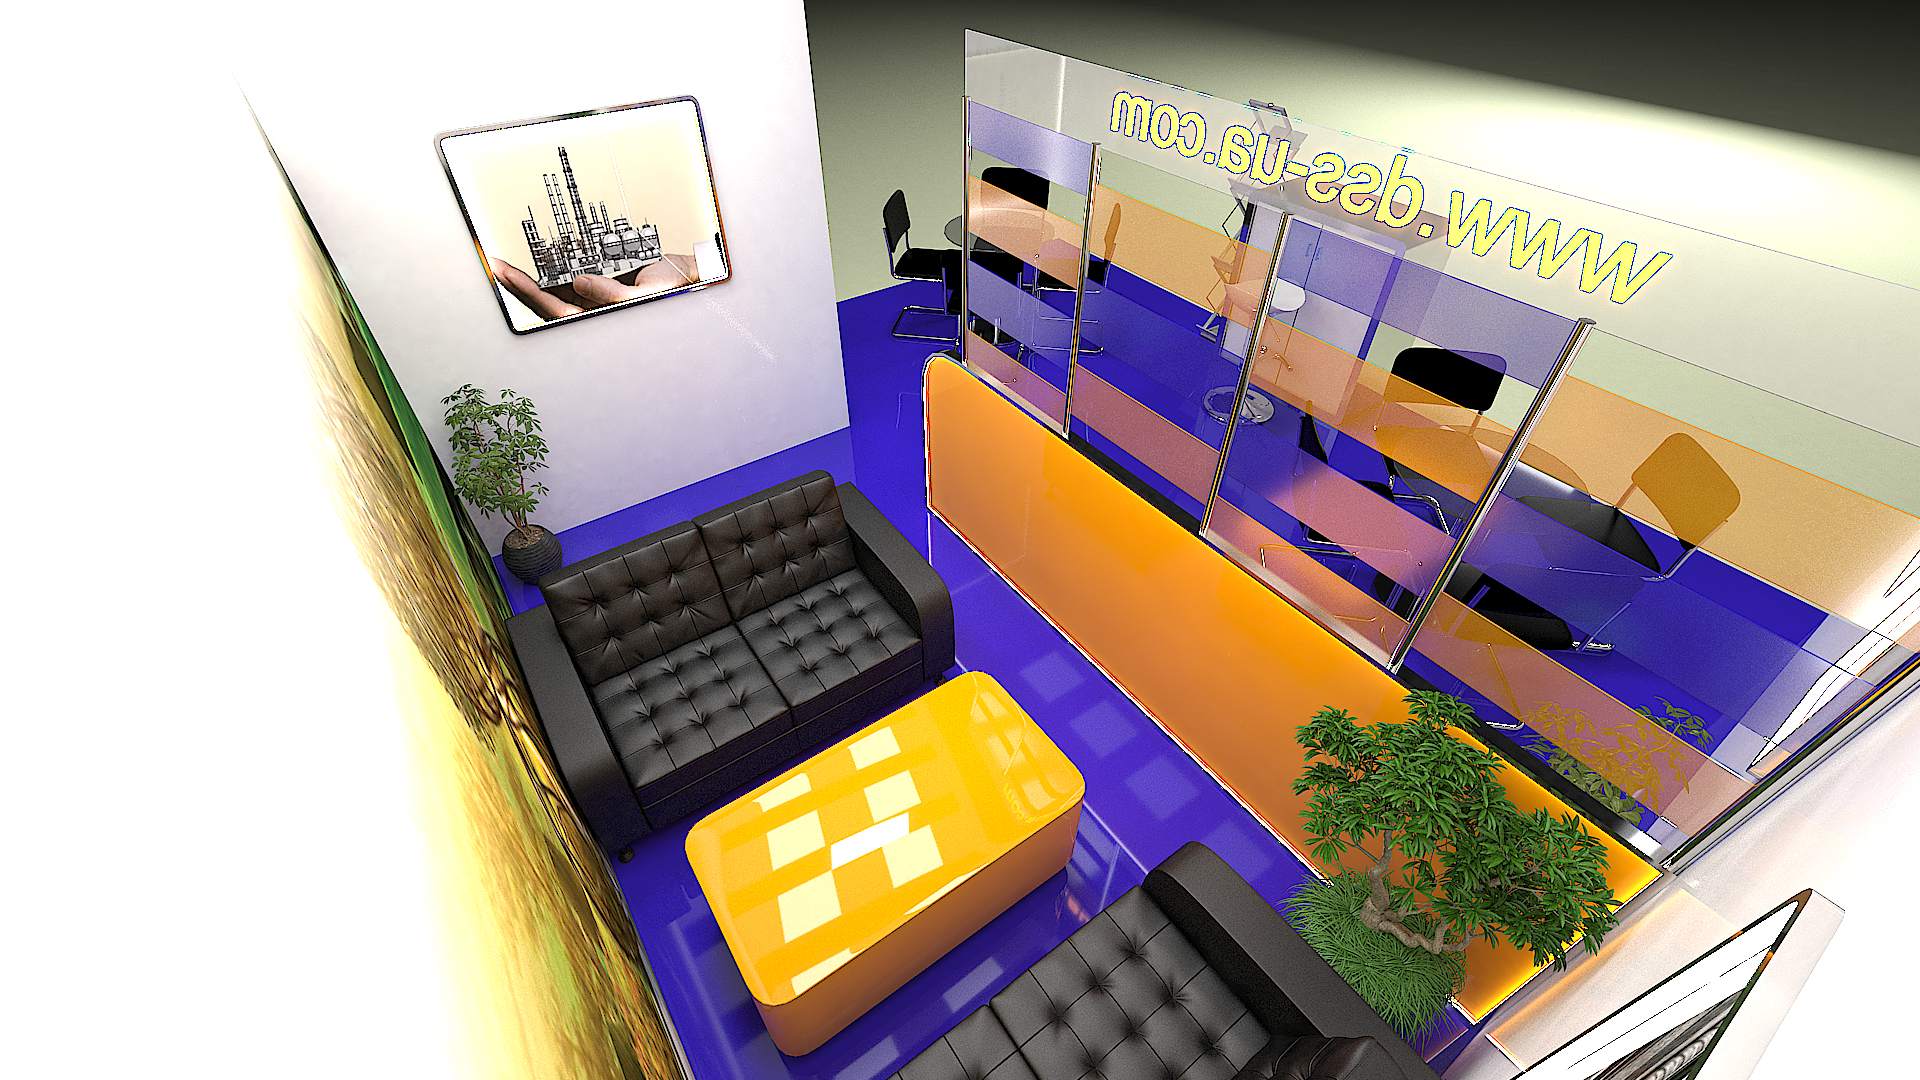 exhibition stand DNIPROSPETSSTAL in 3d max vray 3.0 image